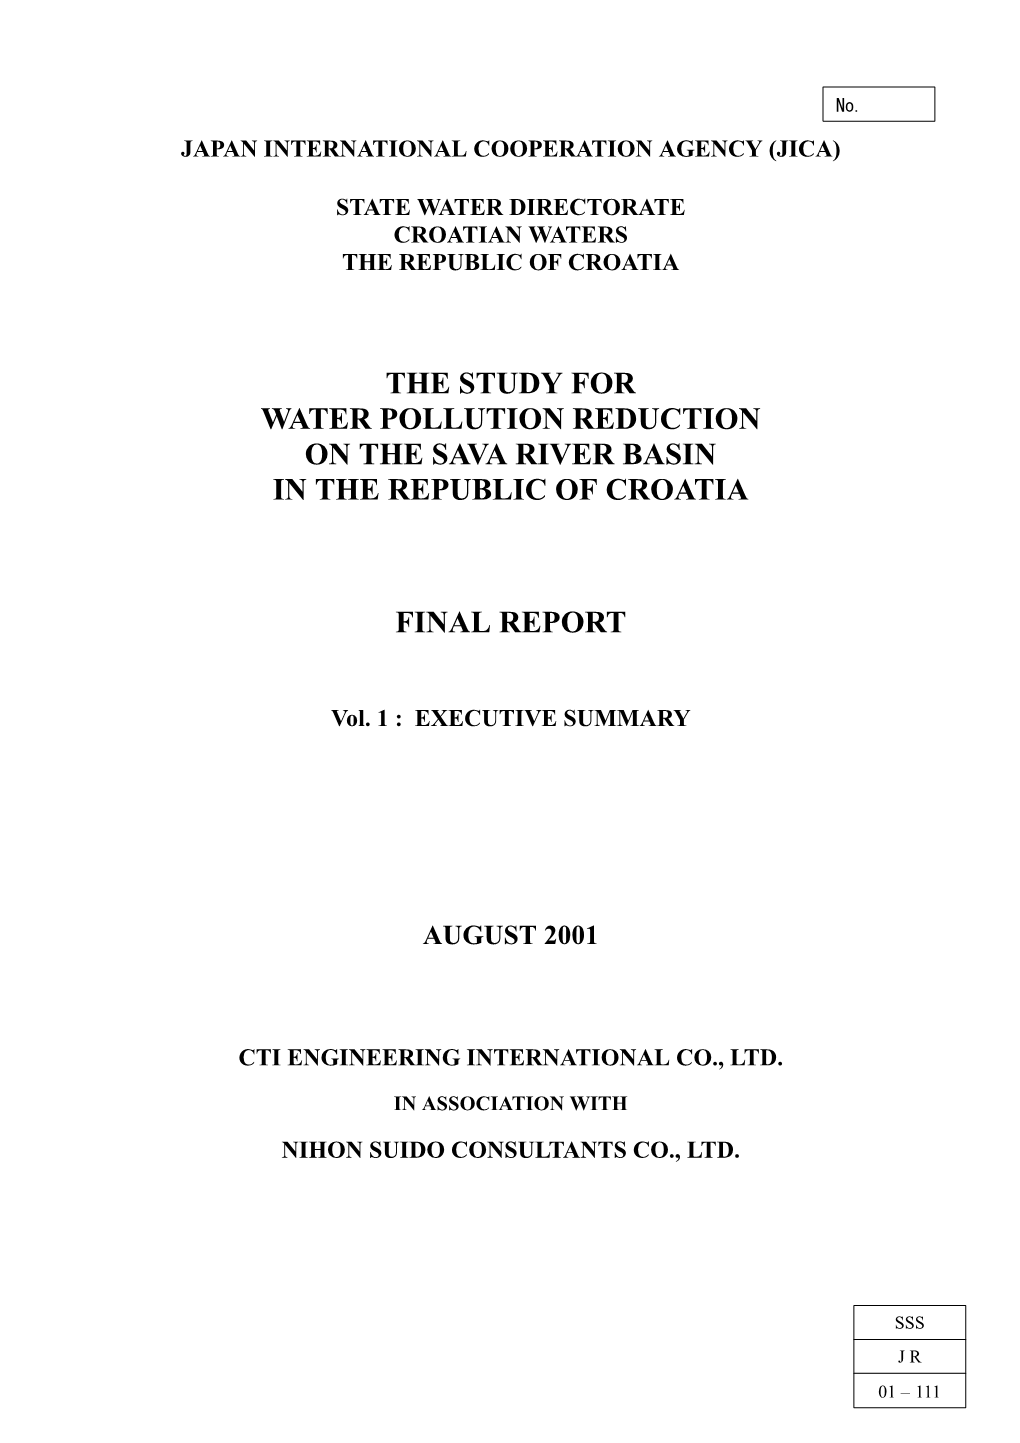 The Study for Water Pollution Reduction on the Sava River Basin in the Republic of Croatia Final Report